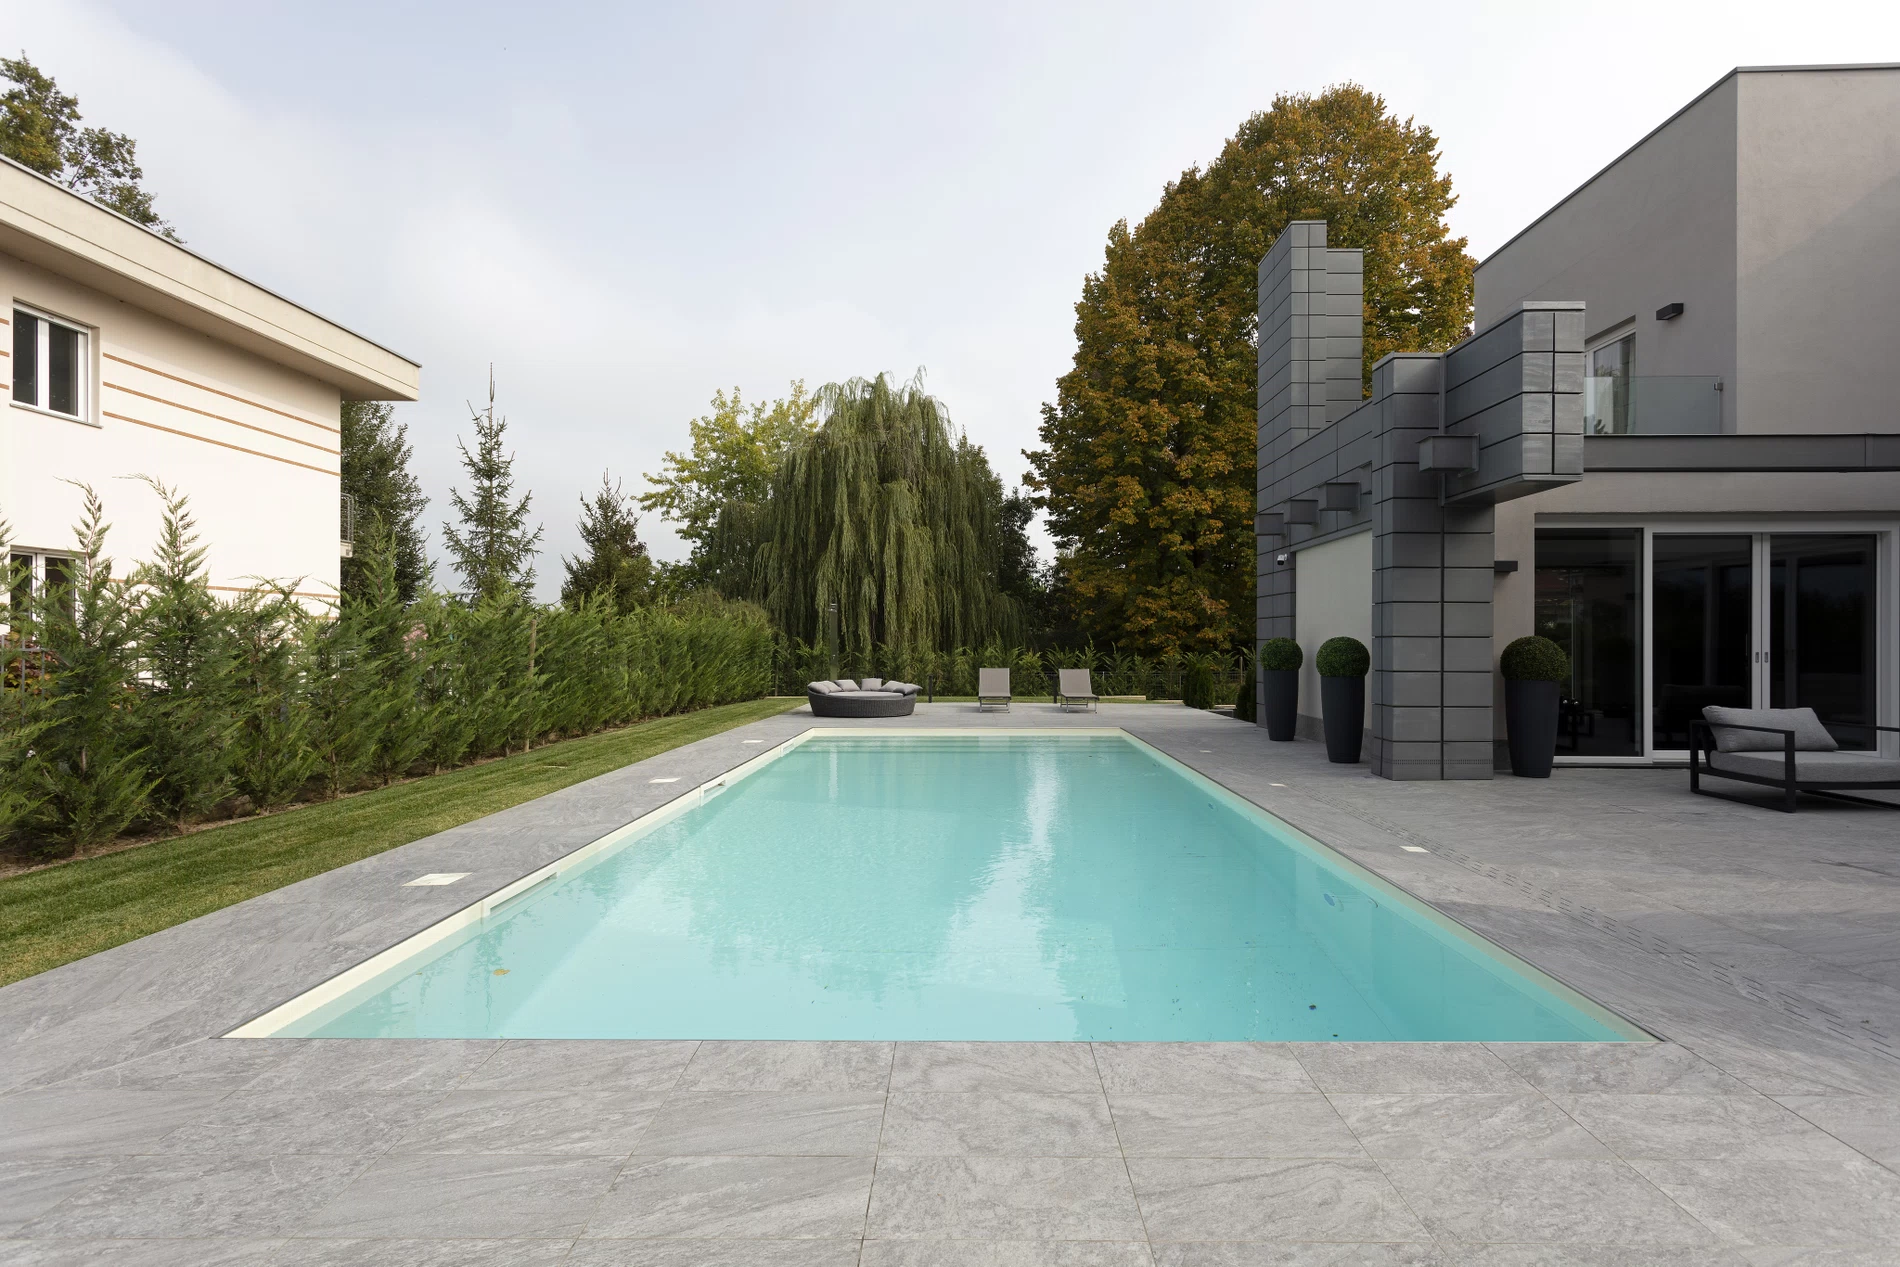 Pool Tiles Italian Porcelain, Can You Use Porcelain Tile In A Pool